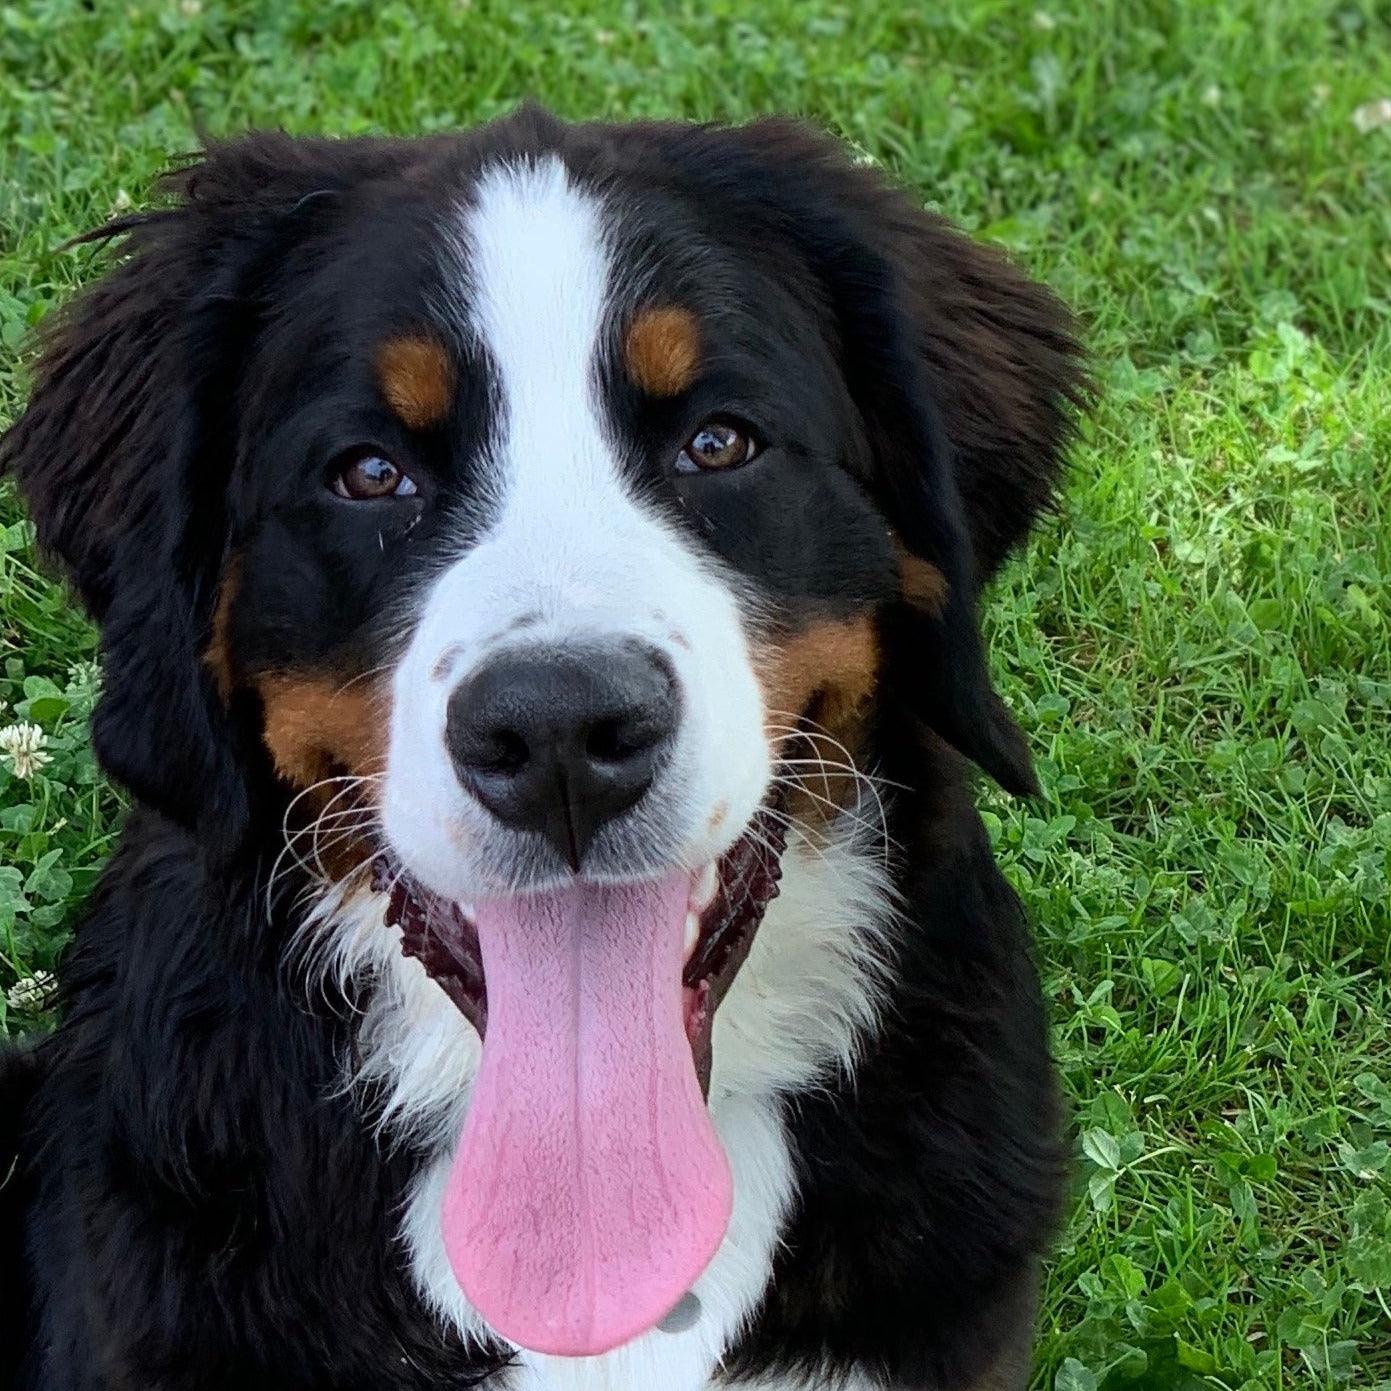 a photo of a Bernese mountain dog puppy sitting on grass in reference to a dog training video that shows how to teach a dog to make eye contact